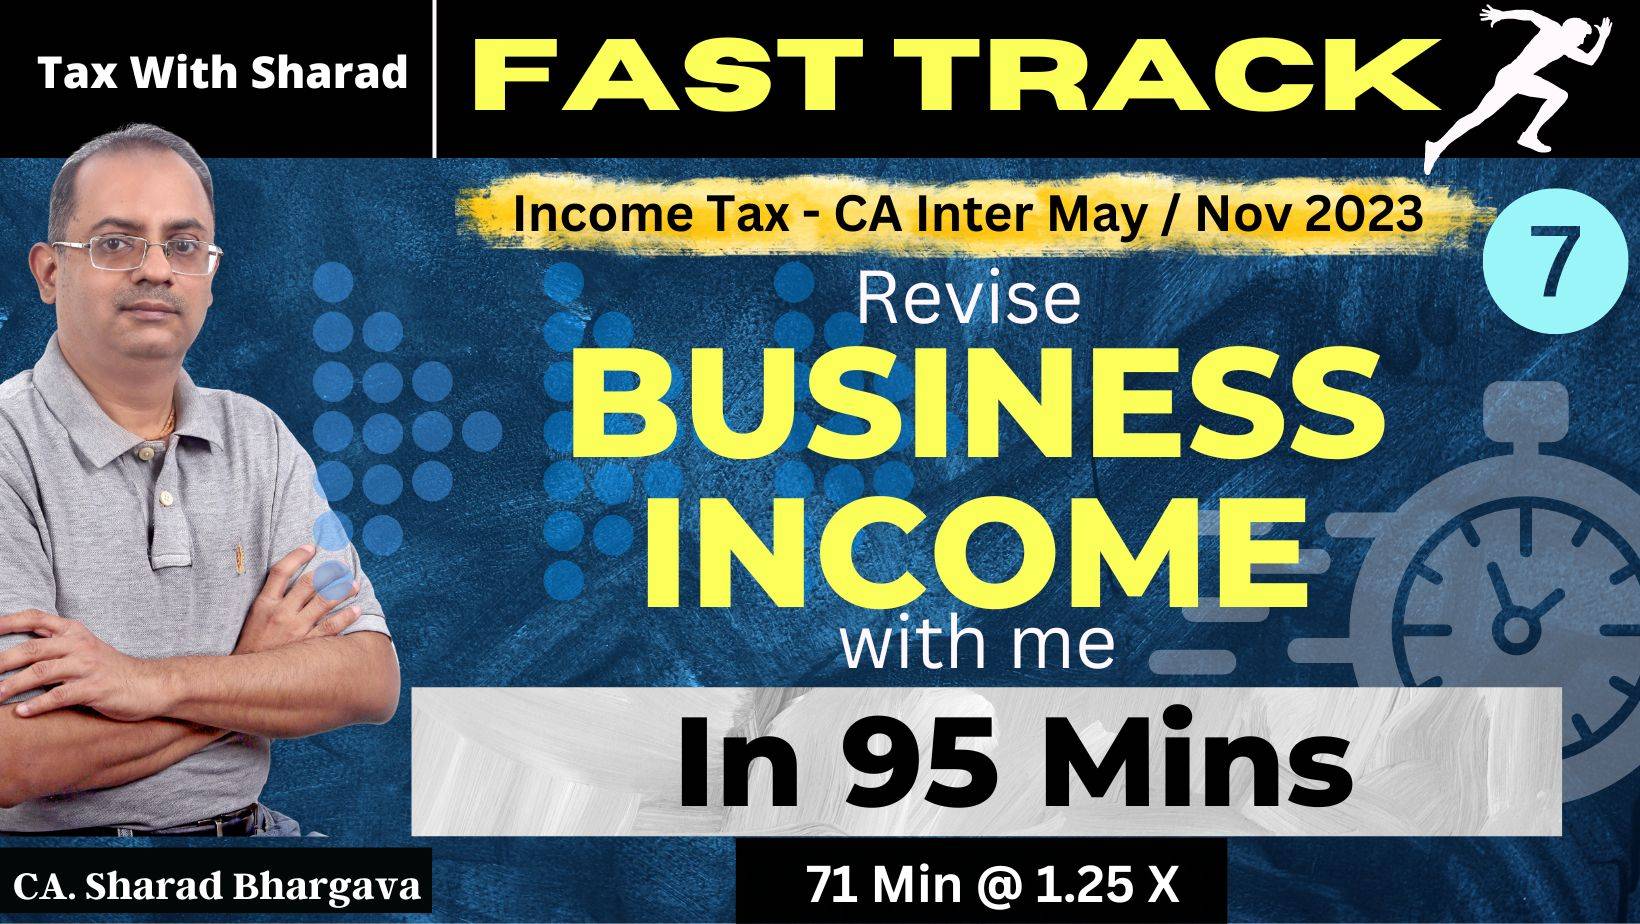 Fast Track Revision (DT) / 7 - Business Income (PGBP) / CA Inter May/ Nov 2023 / CA. Sharad Bhargava